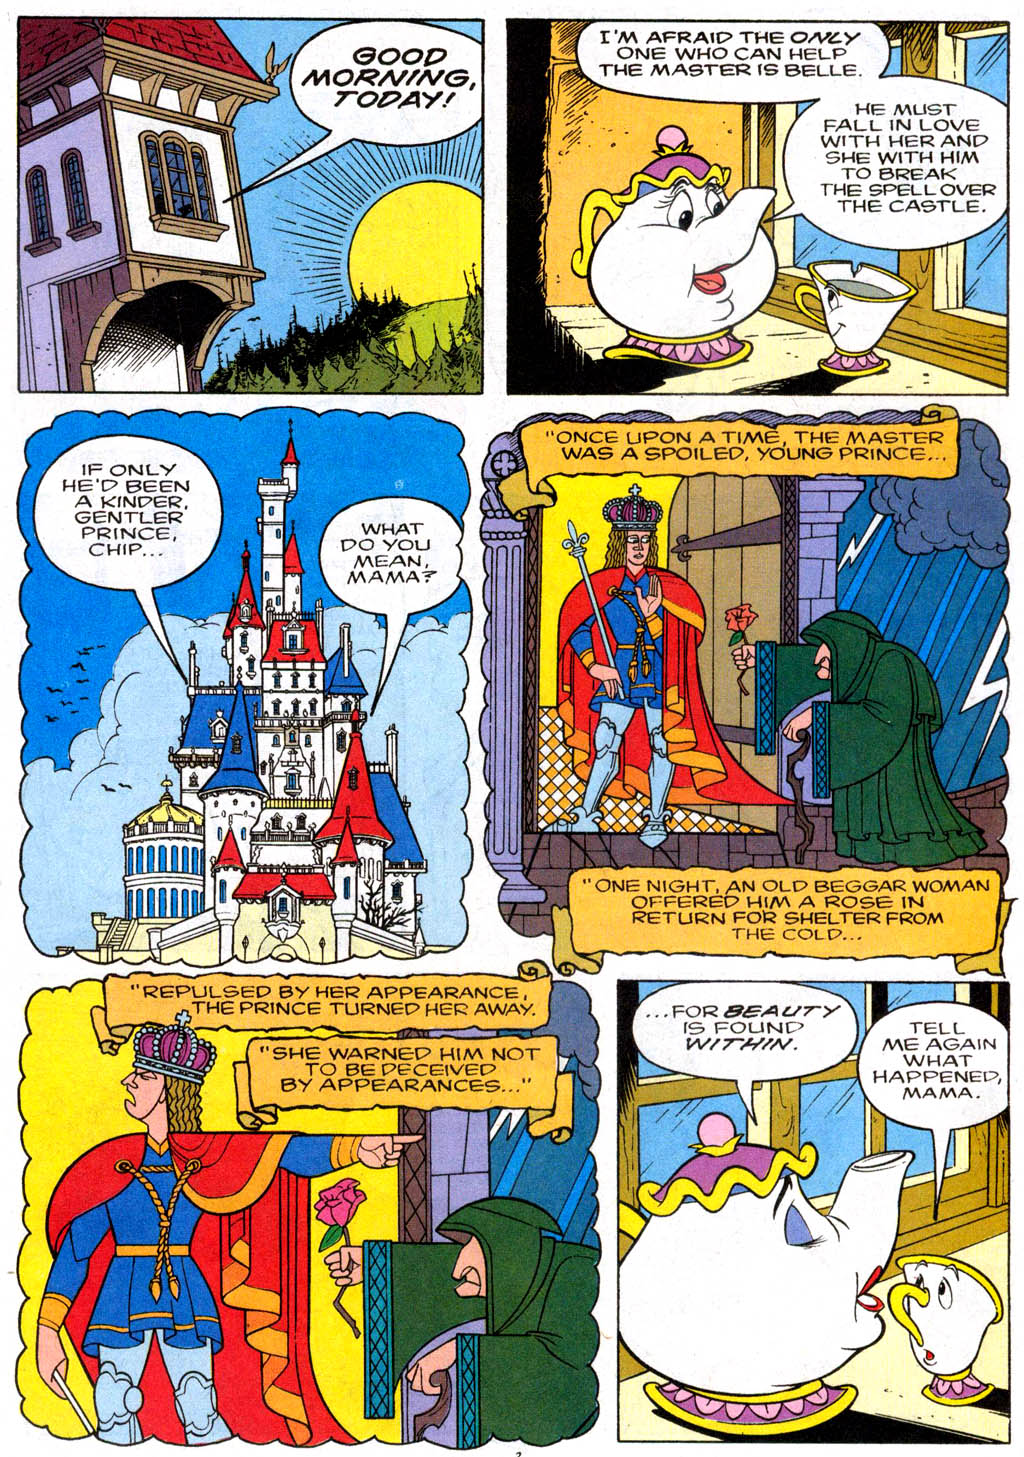 Read online Disney's Beauty and the Beast comic -  Issue #1 - 4